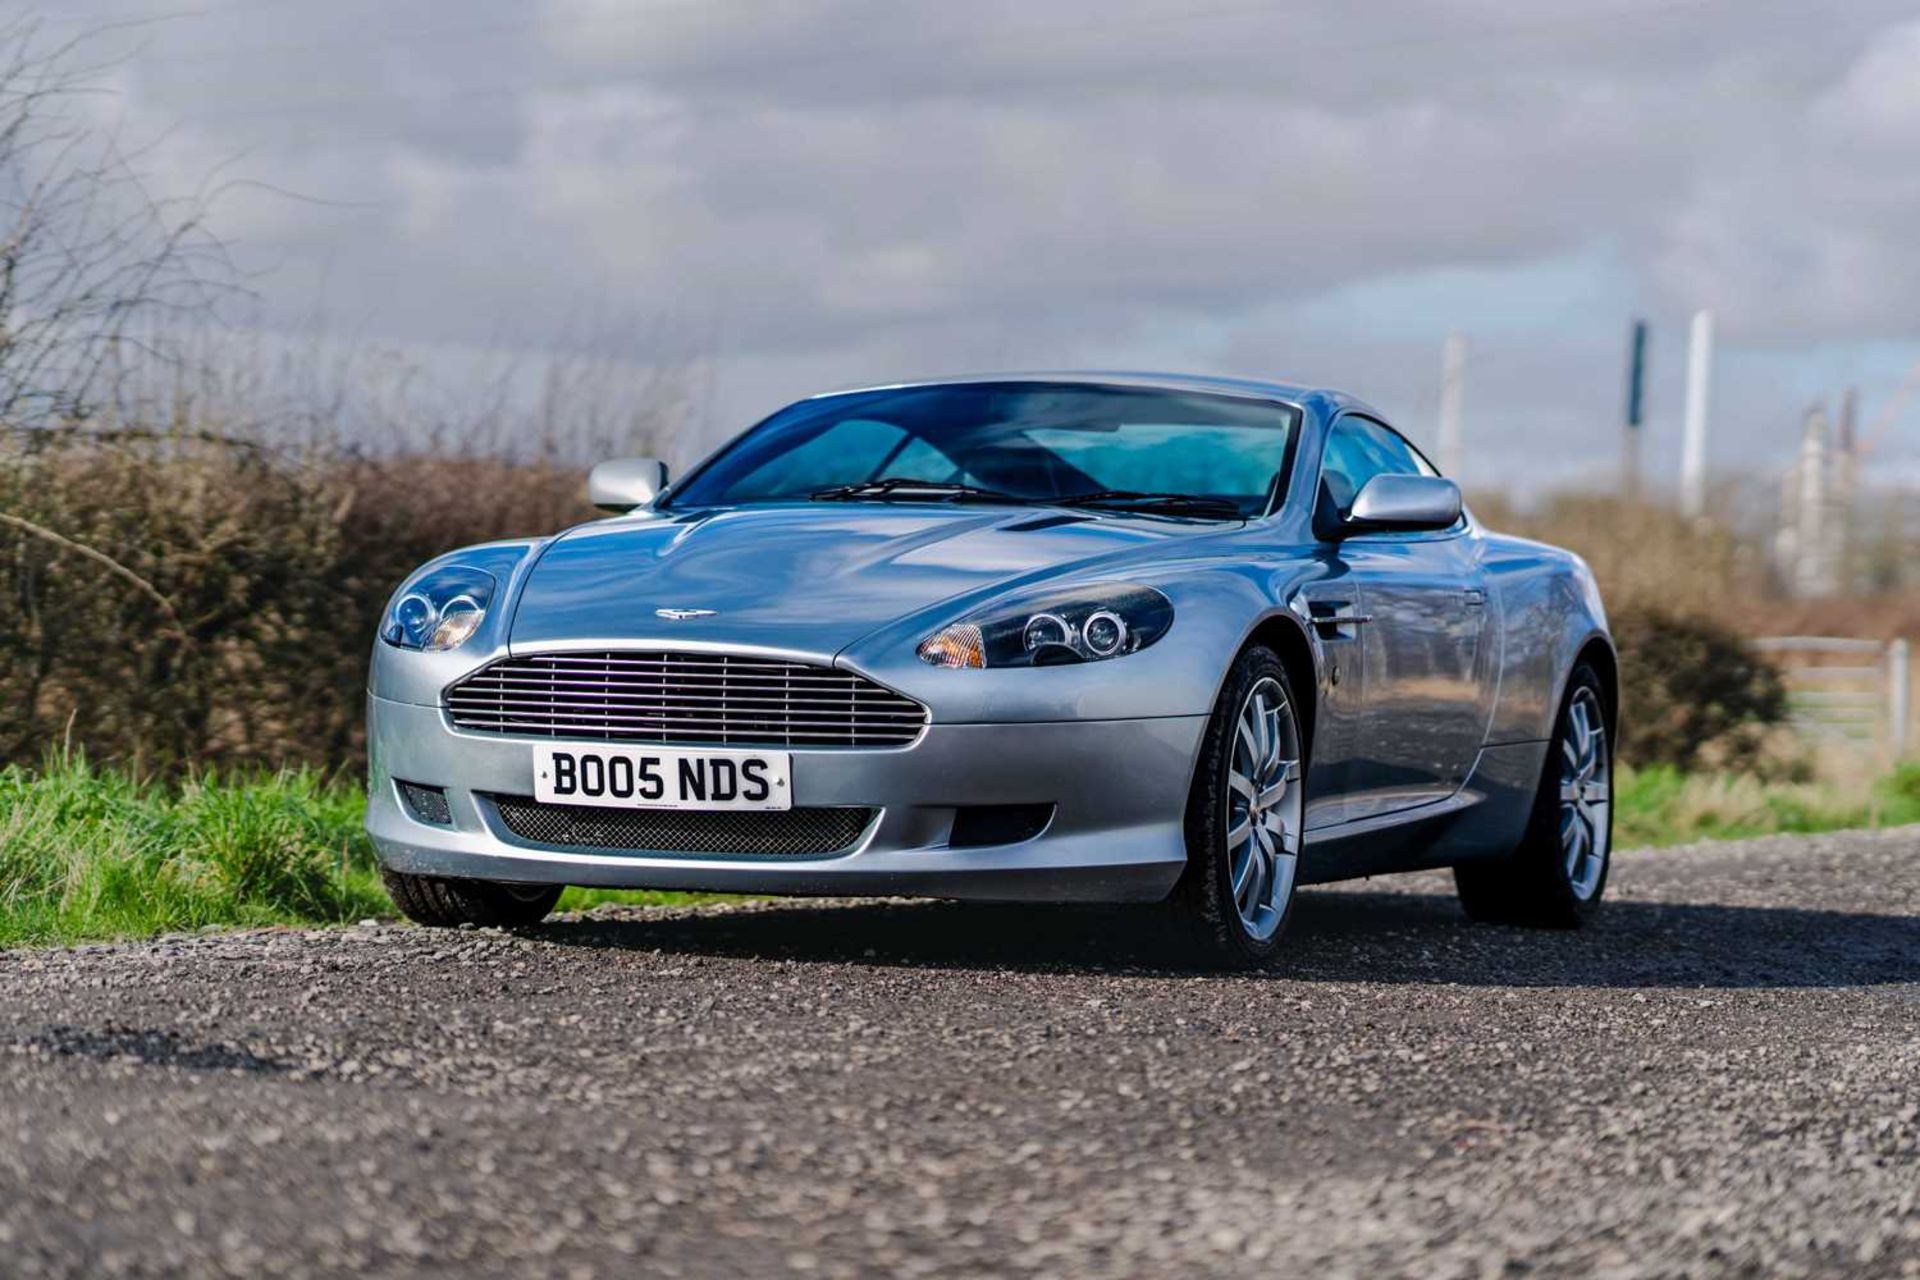 2005 Aston Martin DB9 V12 Only 33,000 miles with full Aston Martin service history - Image 6 of 70